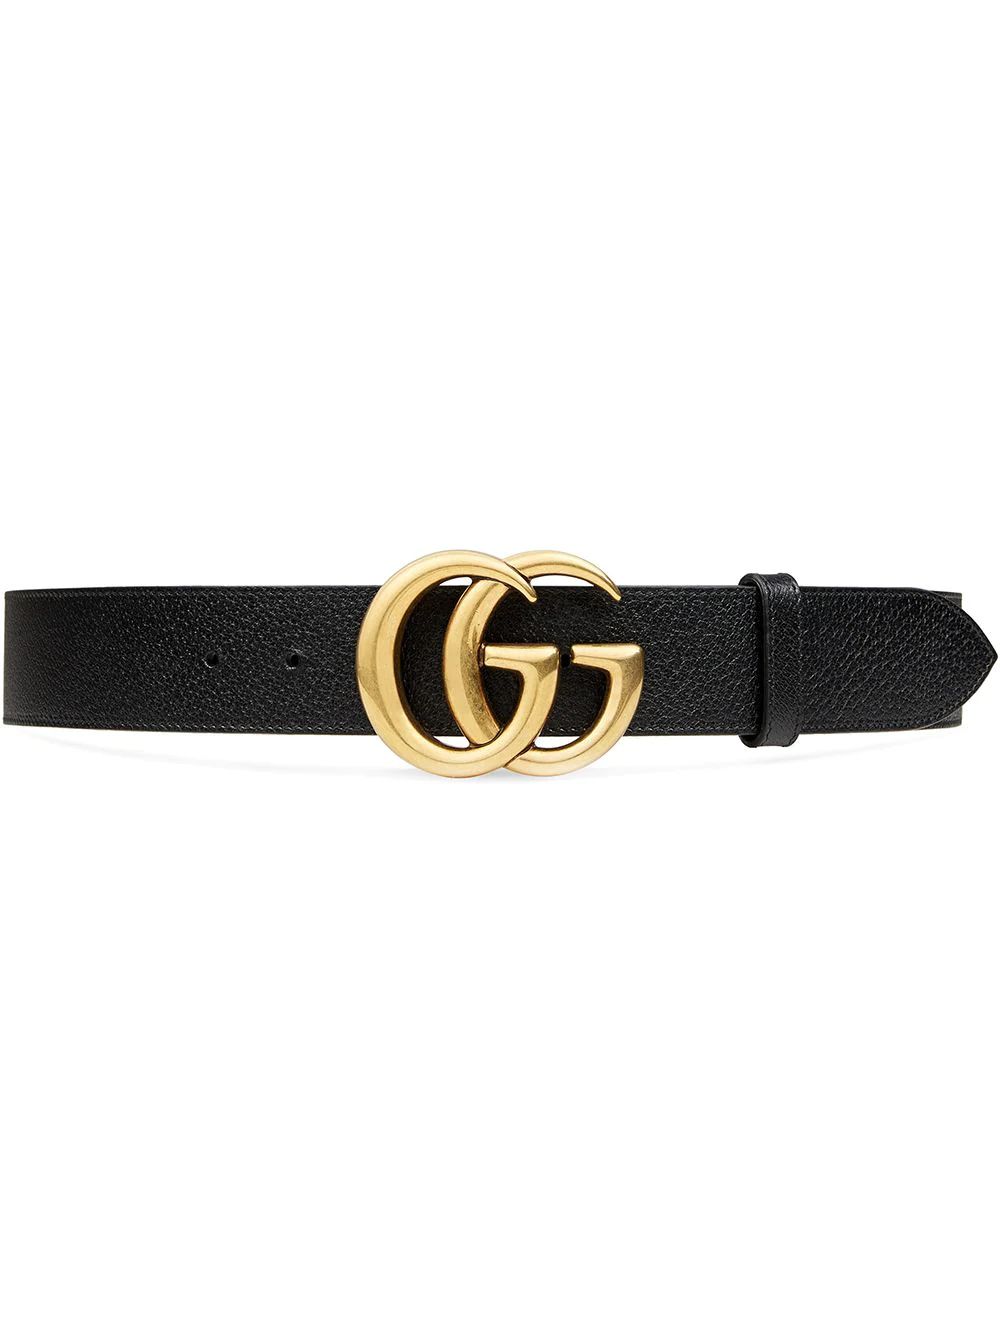 Leather belt with double G buckle | Farfetch (UK)